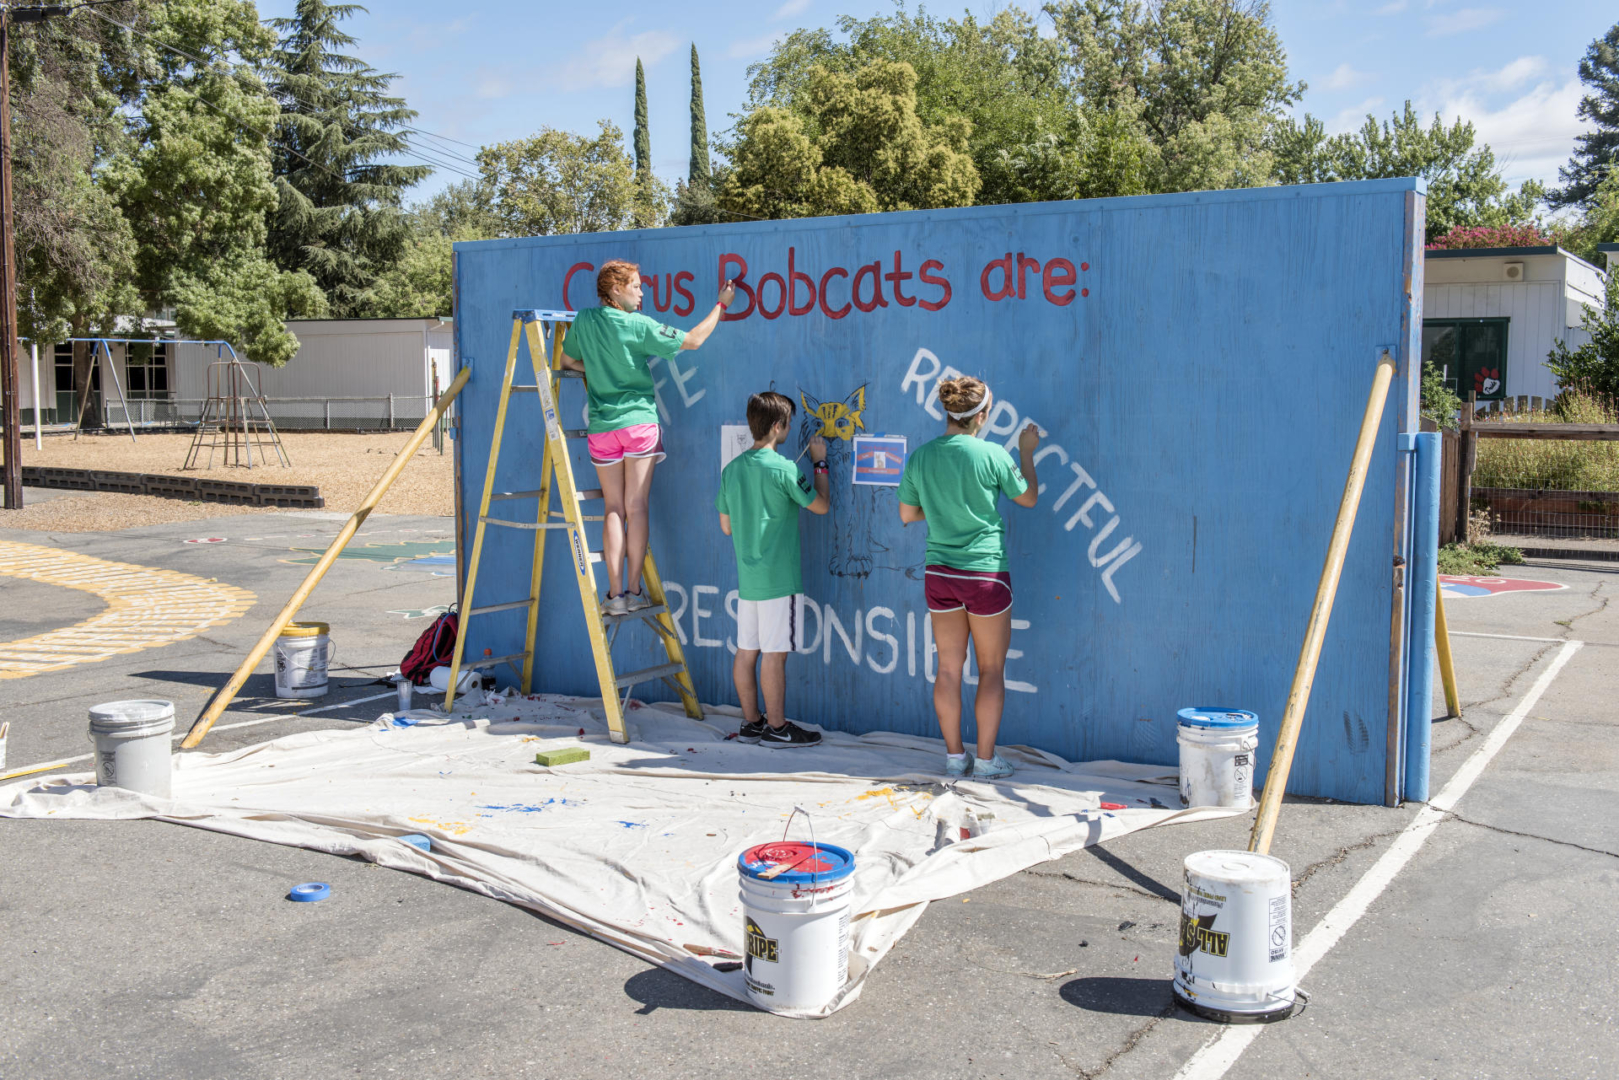 Students paint a mural on a backboard for playing ball at Citrus Elementary.